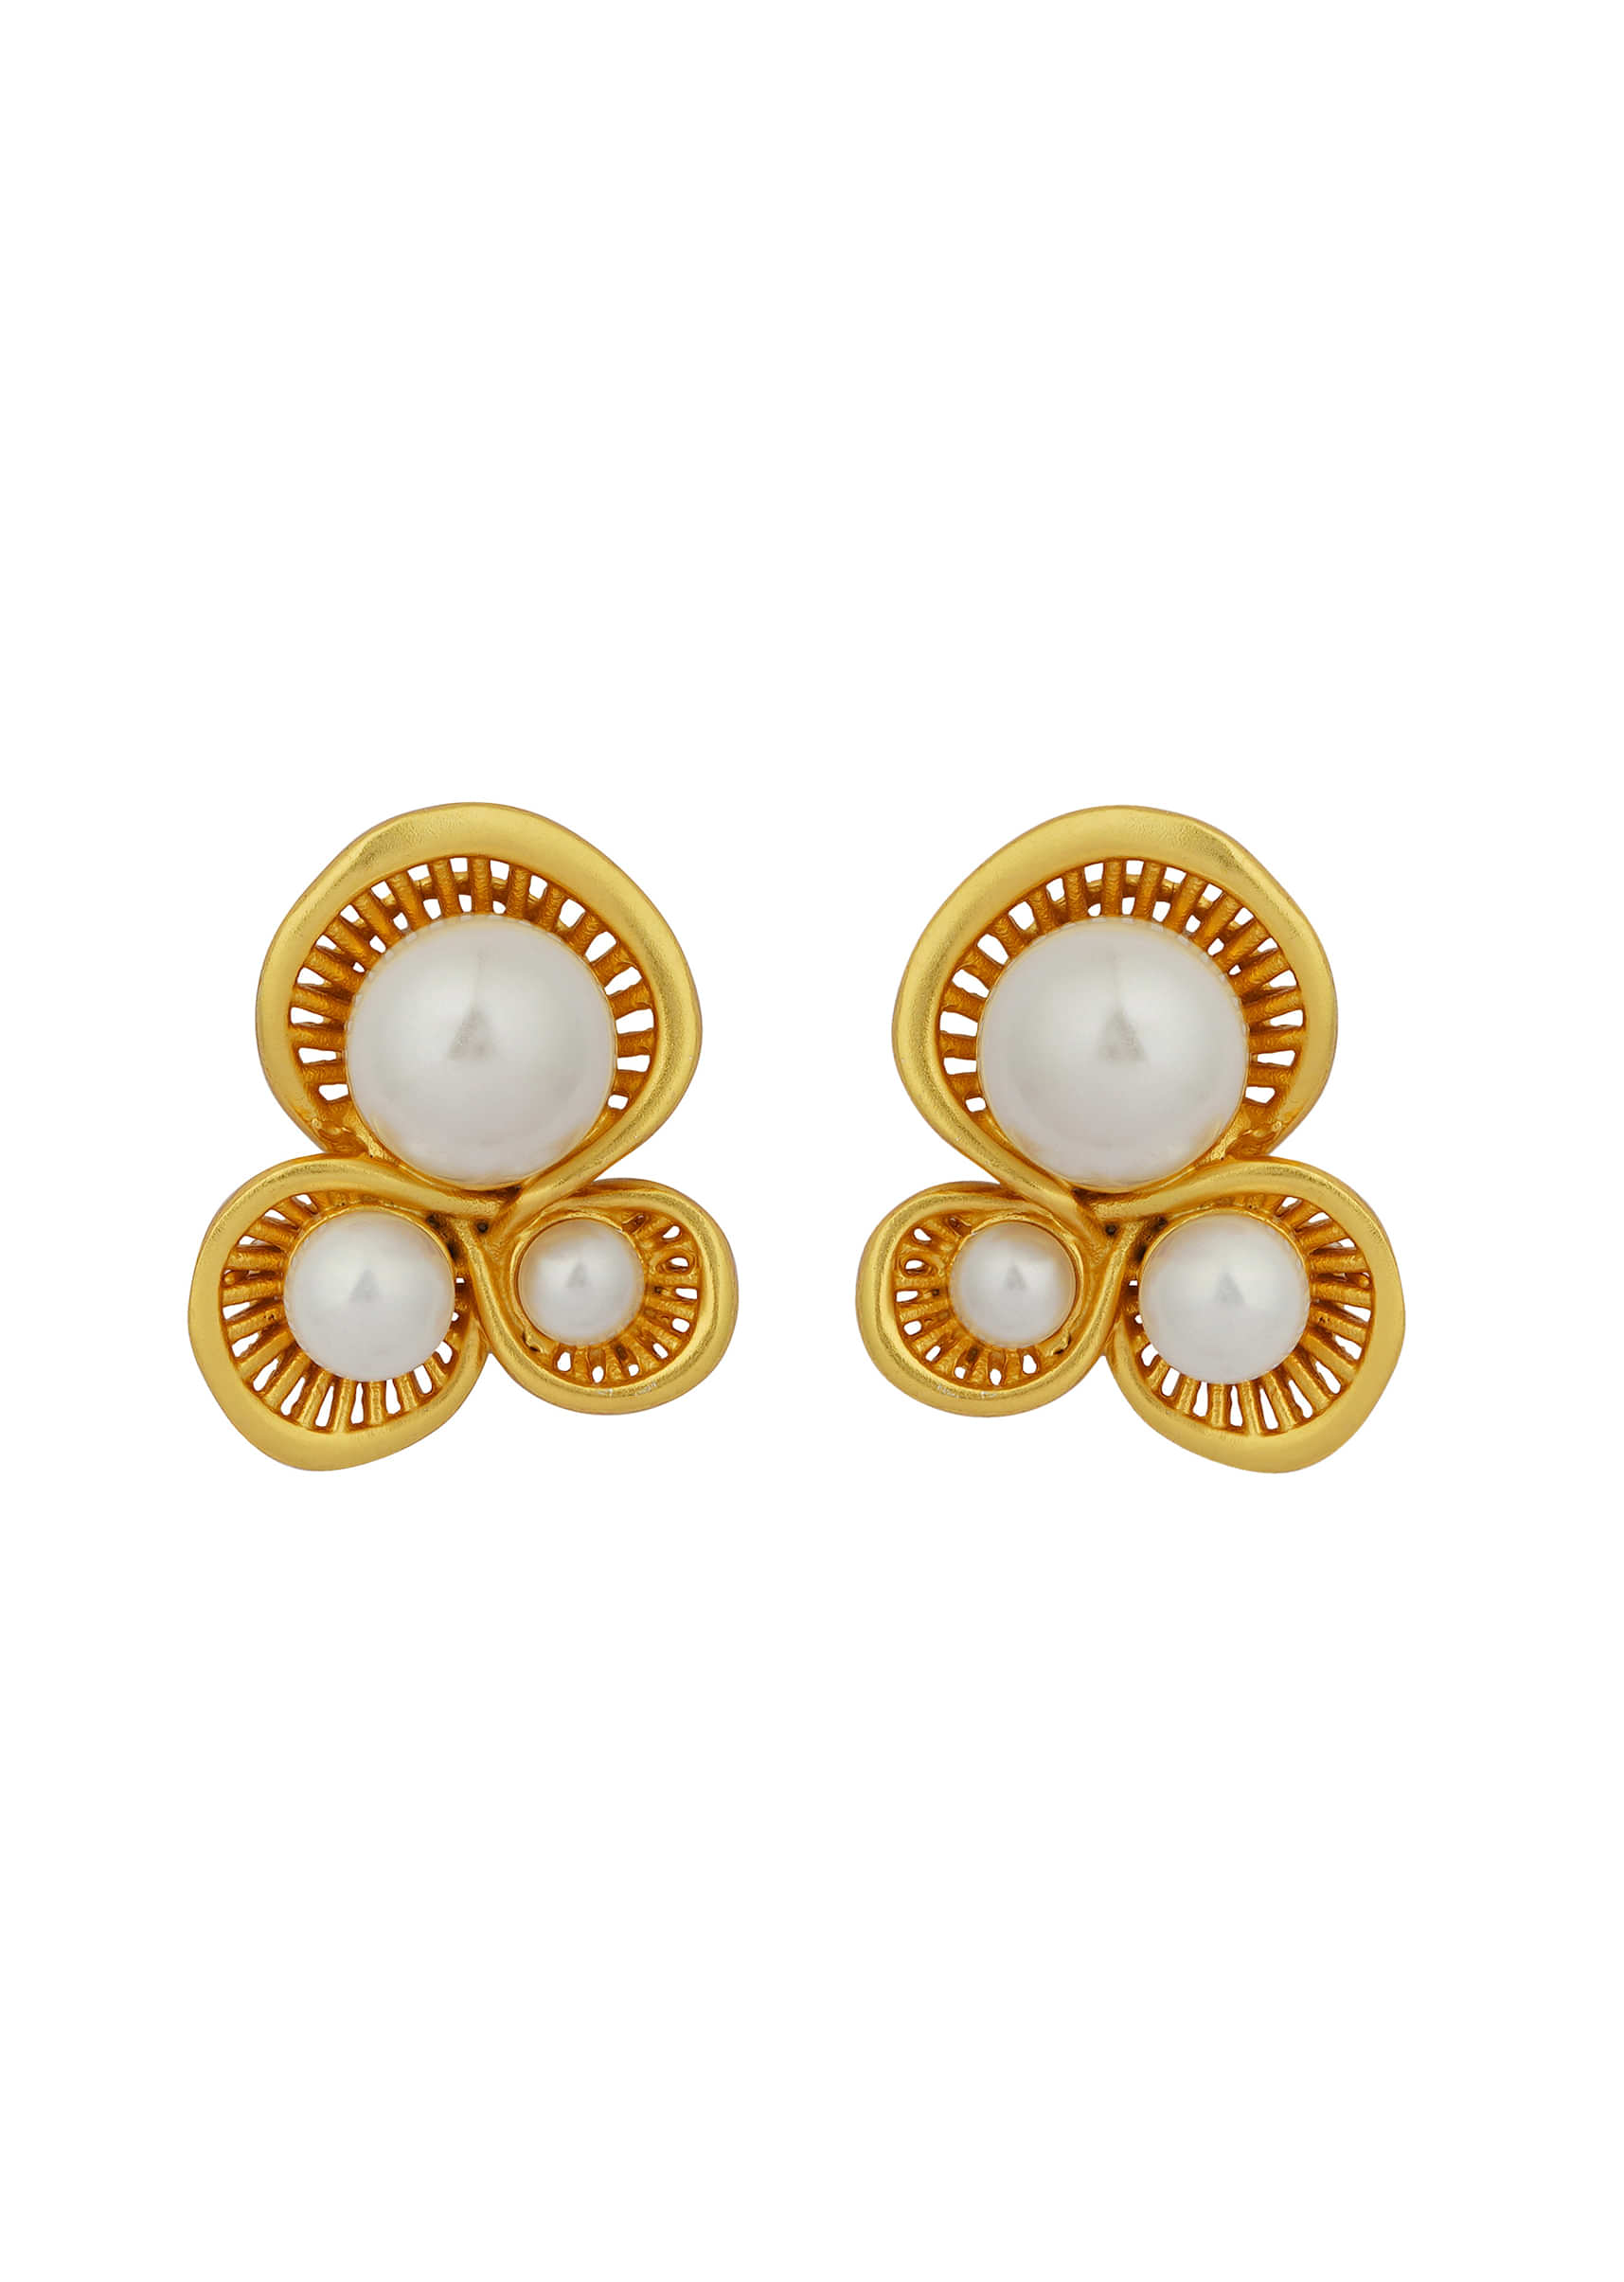 Gold 22K Party Wear Studs Earrings With White Shell Pearl